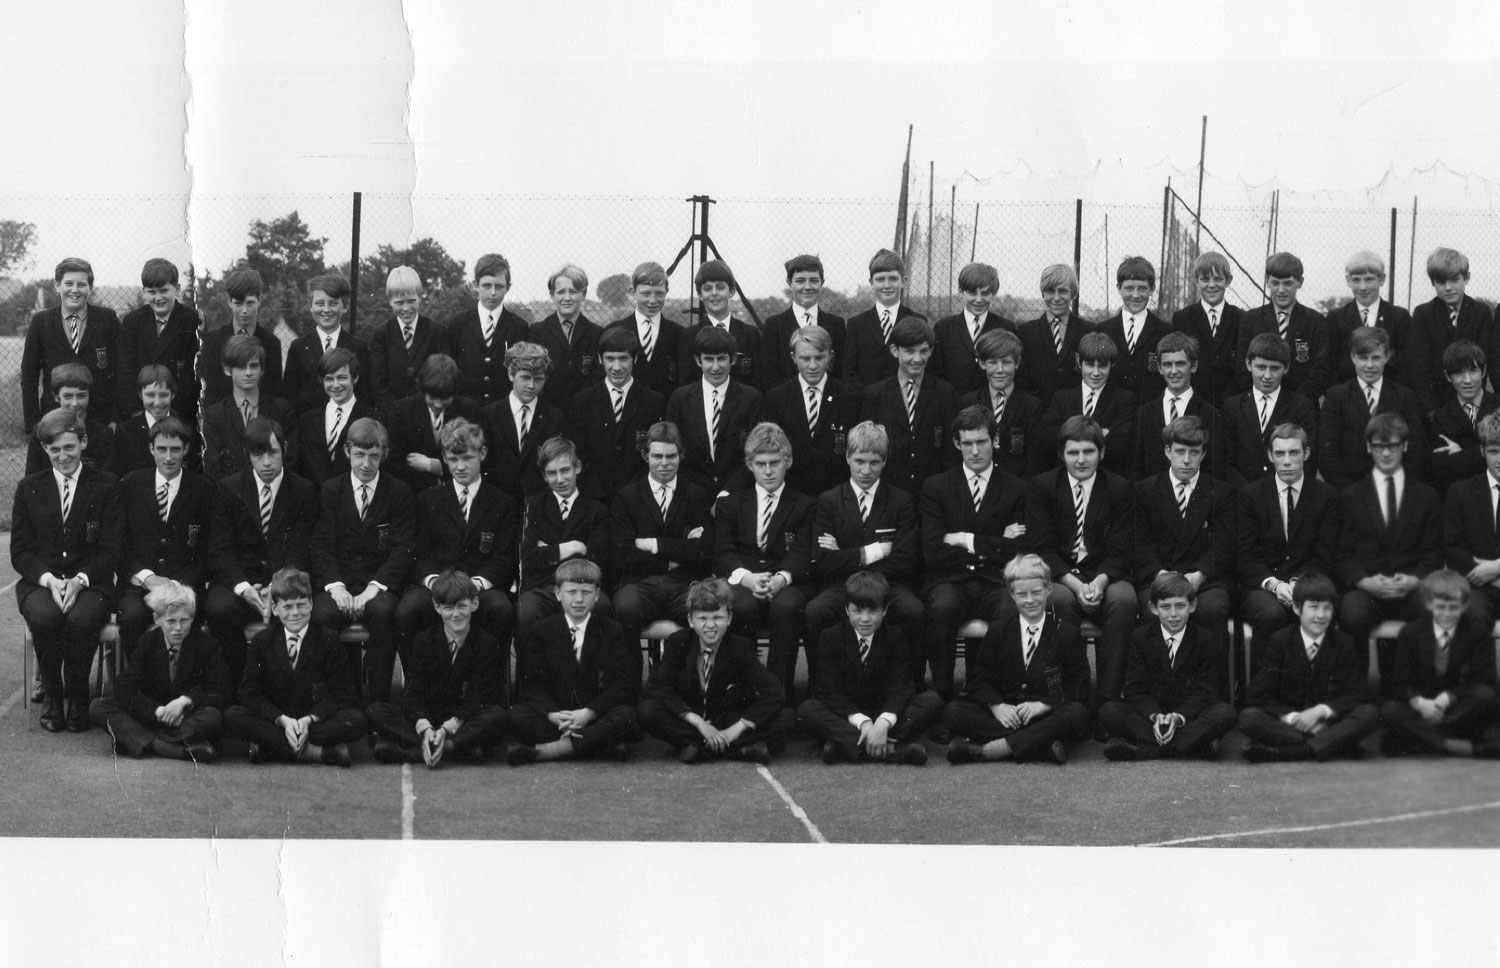 A photo of section1 of the Bells Grammar School photo from 1968 - section 1